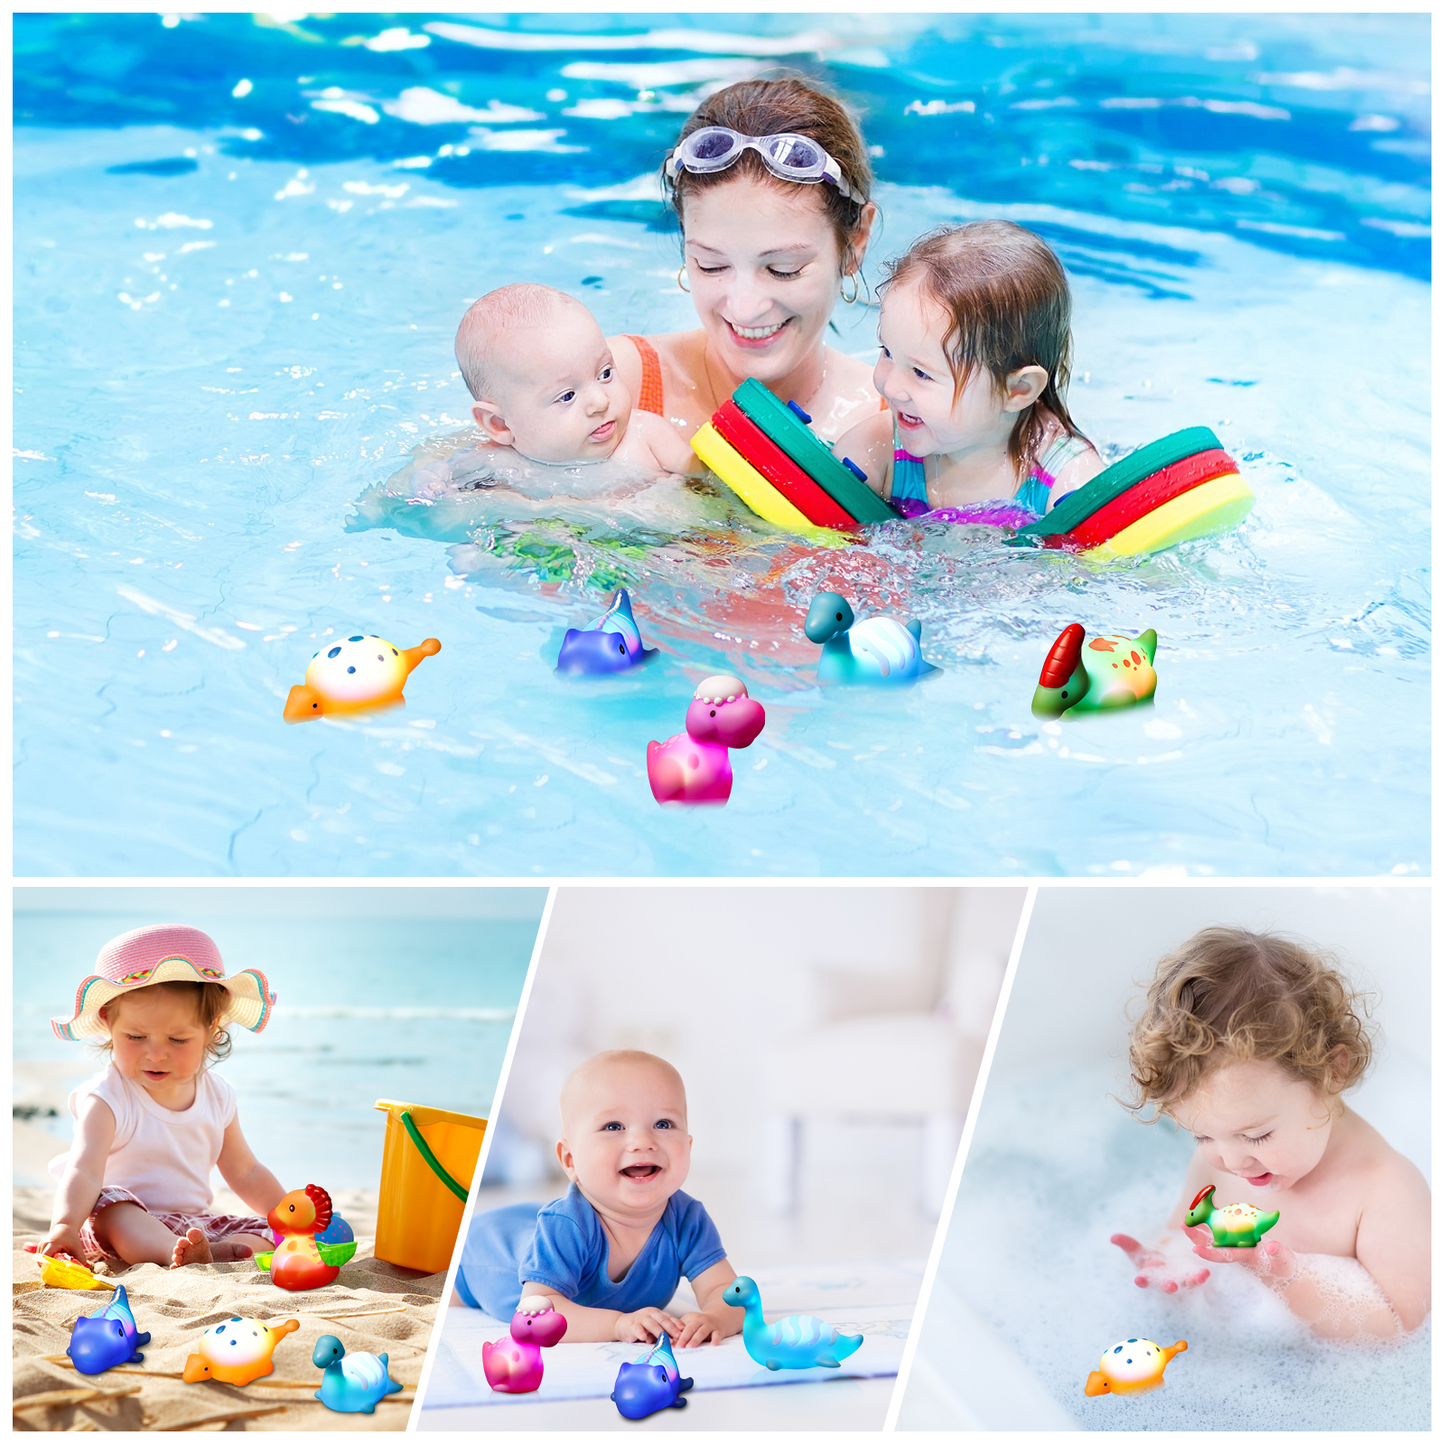 Baby Bath Toys for Toddlers, 6 PCS Dinosaur Mold Free, Light-up Floating Kids Bathtub Summer Beach Swimming Pool Toys for Infants 6 Months up